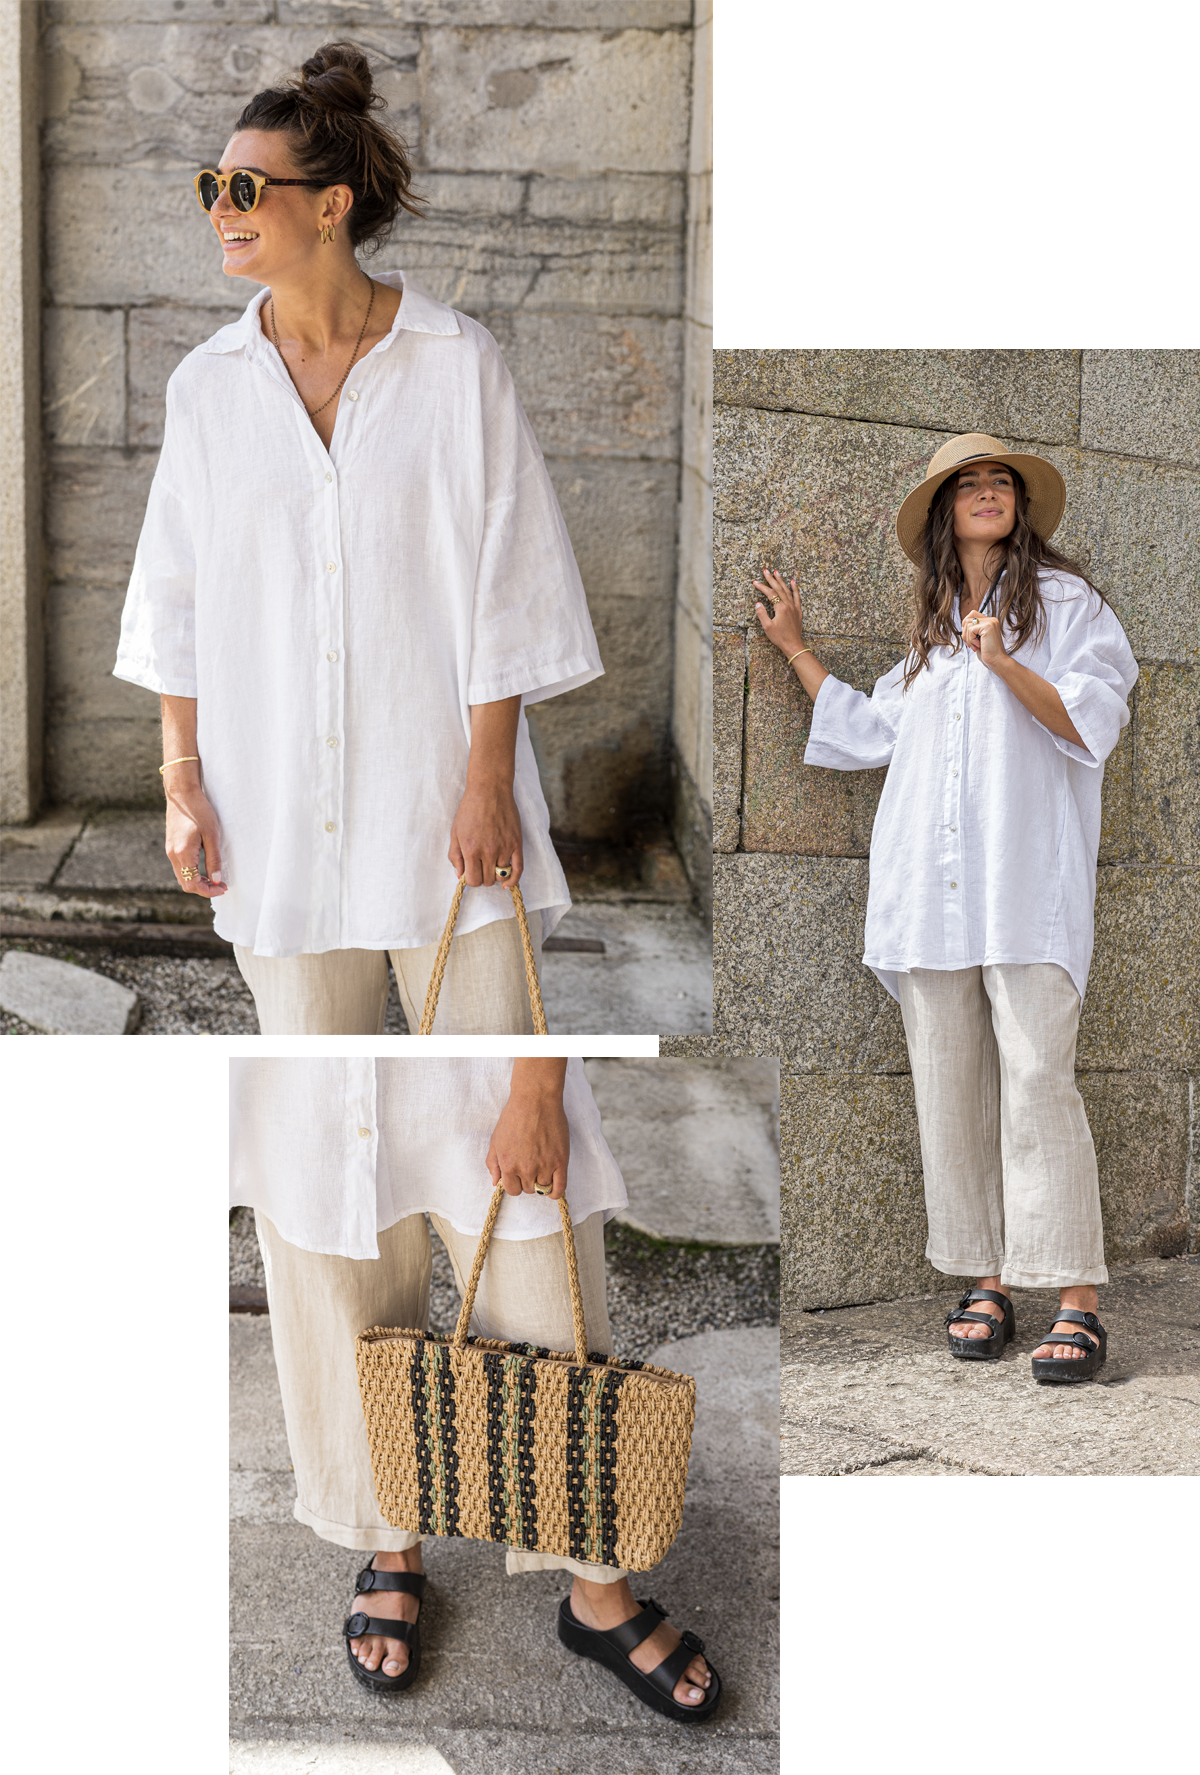 A model wearing a white linen shirt and beige trousers